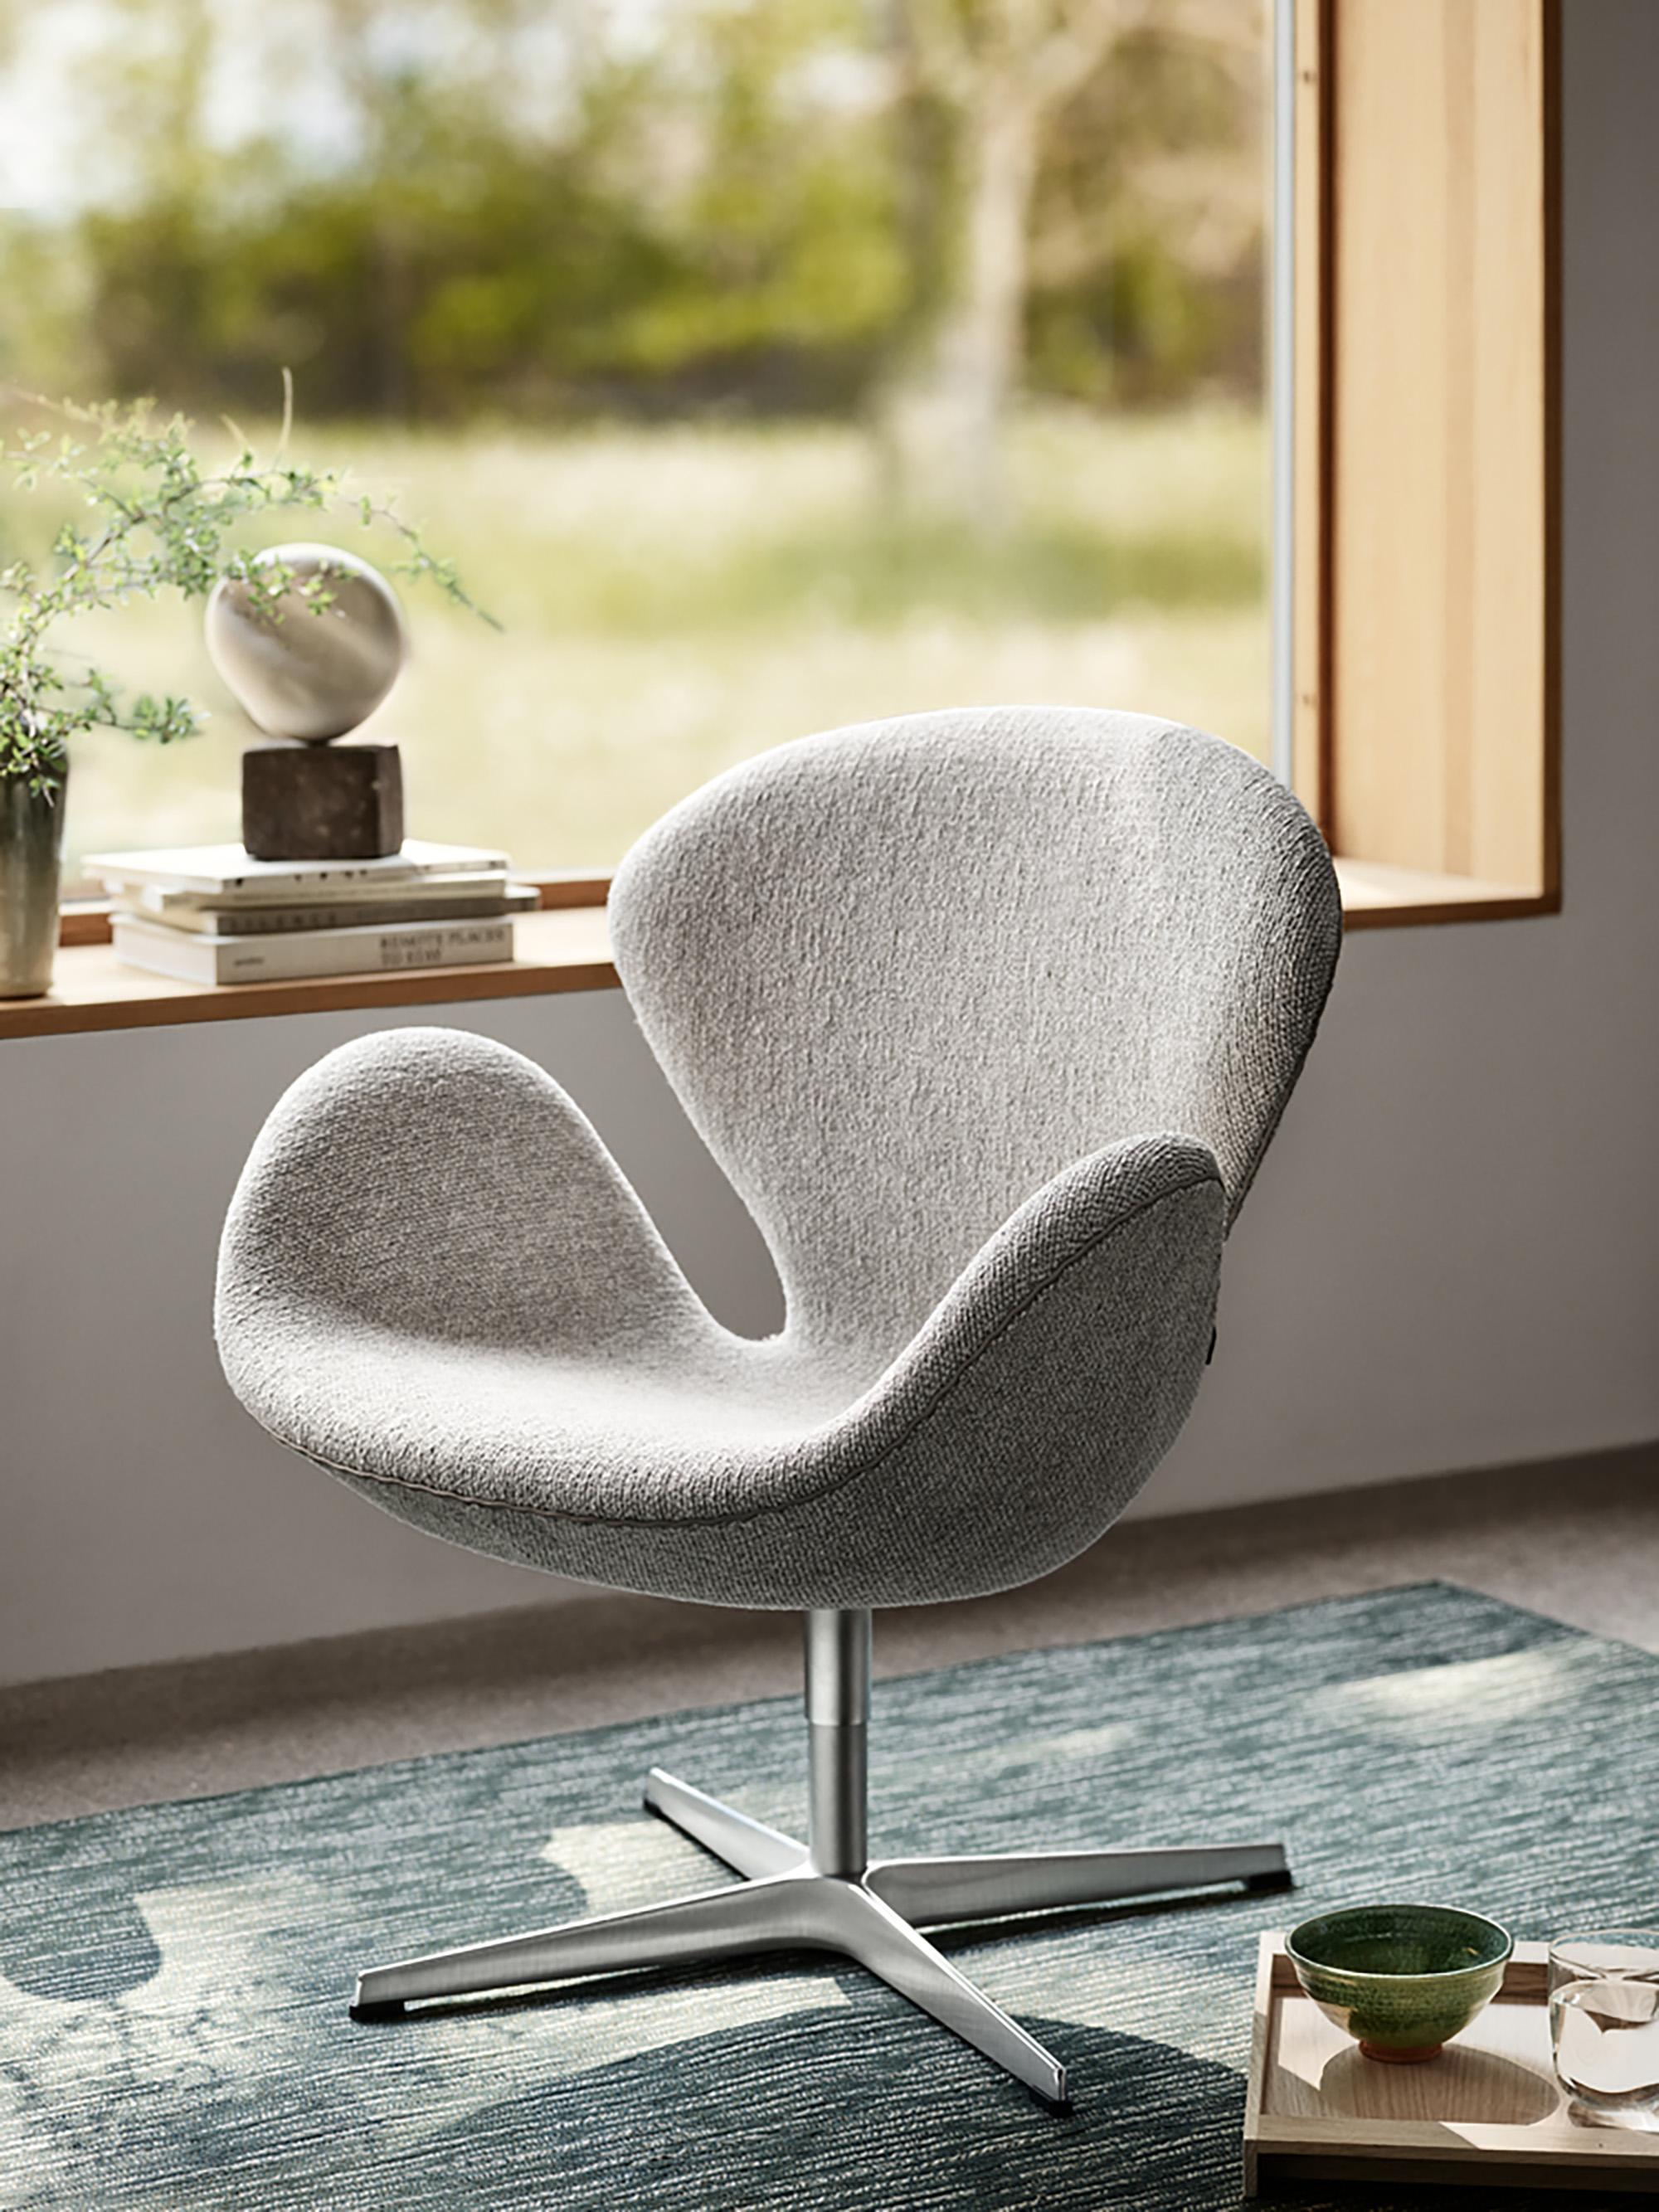 Arne Jacobsen 'Swan' Chair for Fritz Hansen in Christianshavn Fabric Upholstery.

Established in 1872, Fritz Hansen has become synonymous with legendary Danish design. Combining timeless craftsmanship with an emphasis on sustainability, the brand’s